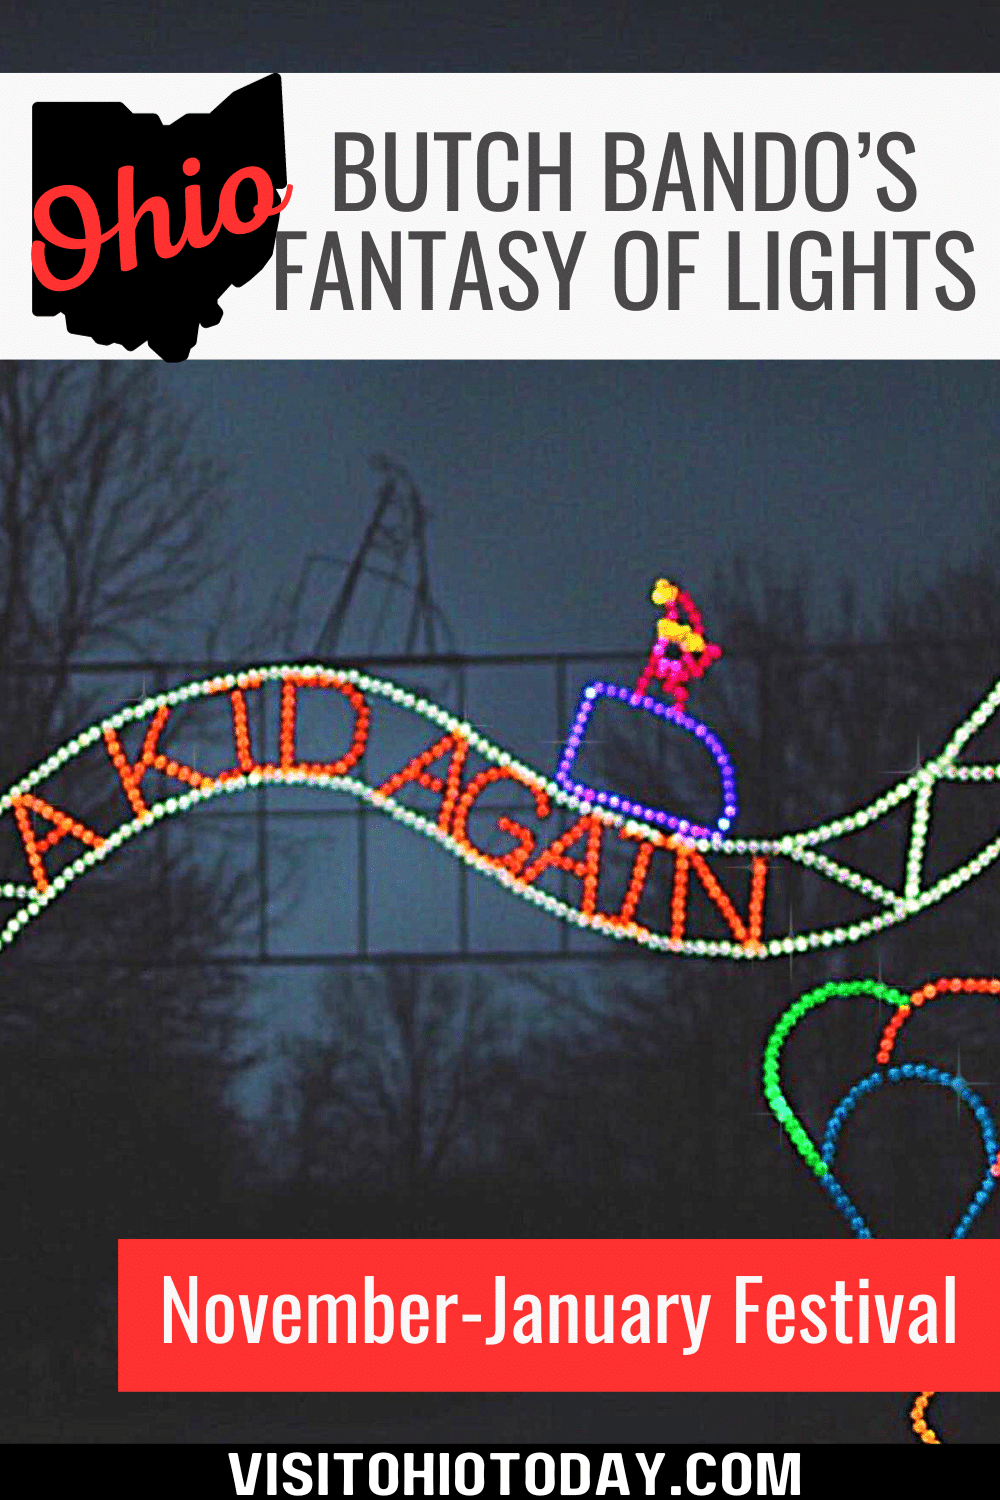 Butch Bando's Fantasy of Lights is a locally owned and family-operated holiday drive-thru light show that takes place at the Alum Creek State Park Campgrounds, November - January.